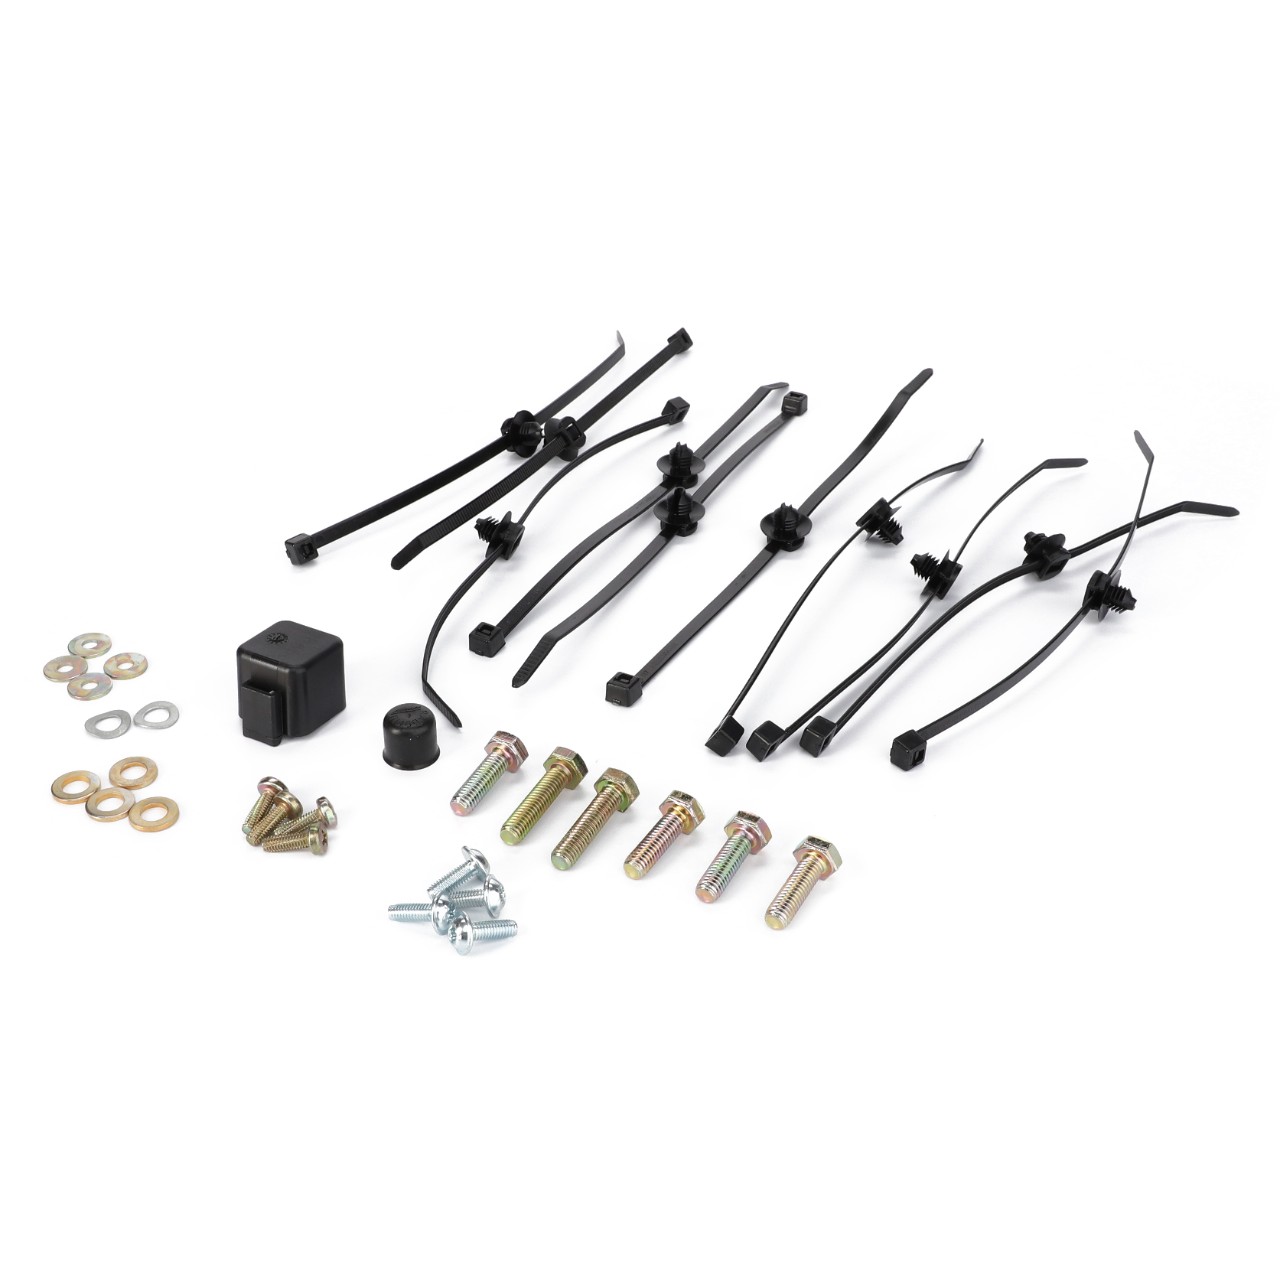 SPARE PARTS KIT | AGCO Parts